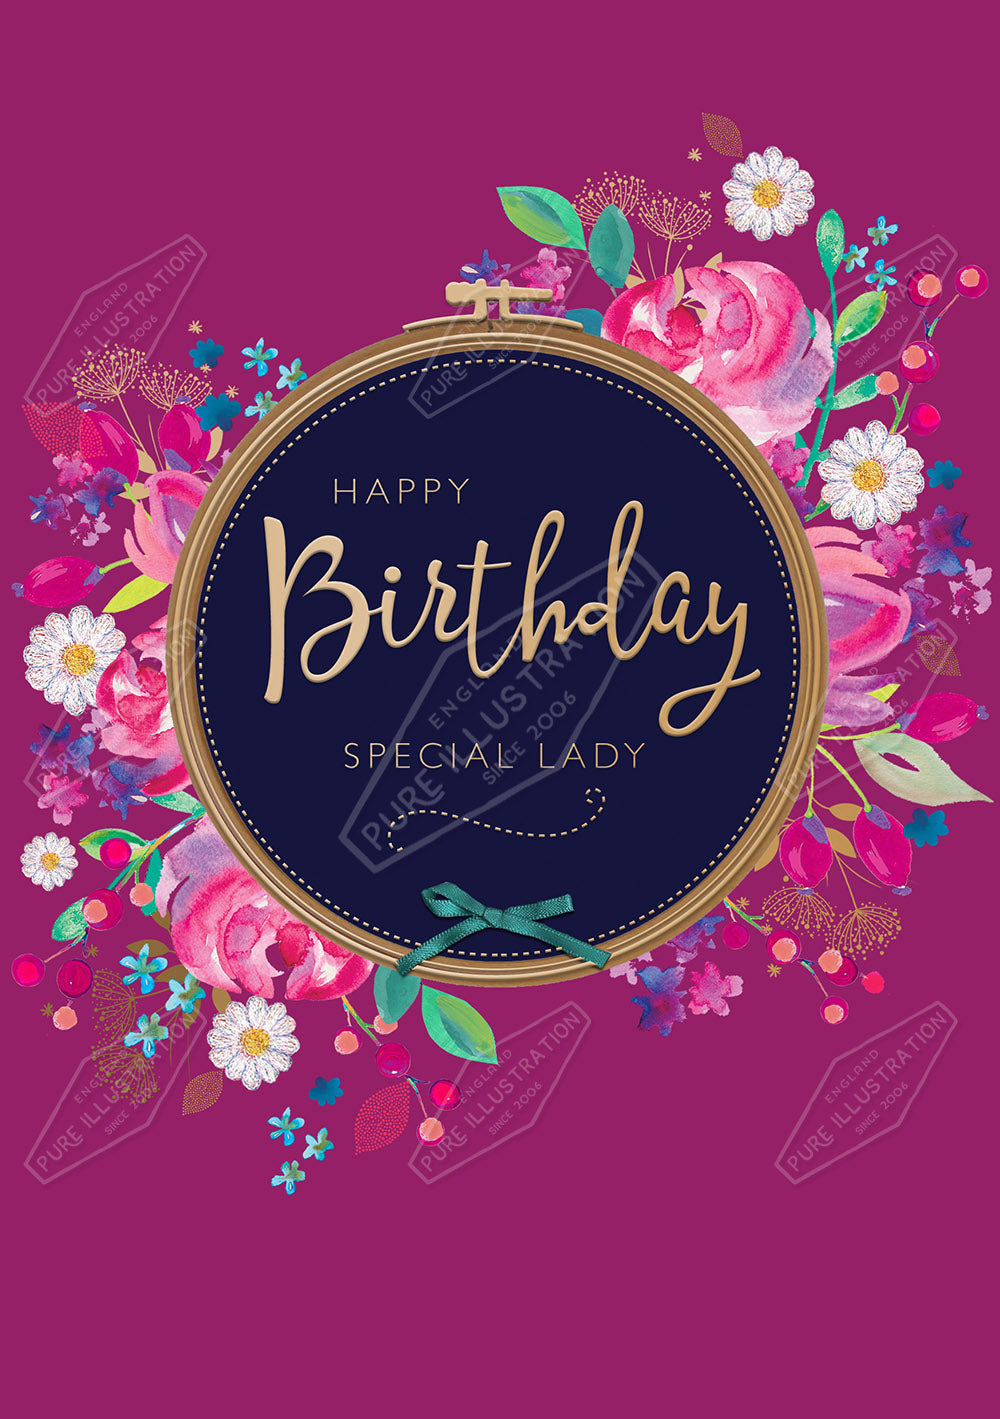 00033192KSP- Kerry Spurling is represented by Pure Art Licensing Agency - Birthday Greeting Card Design